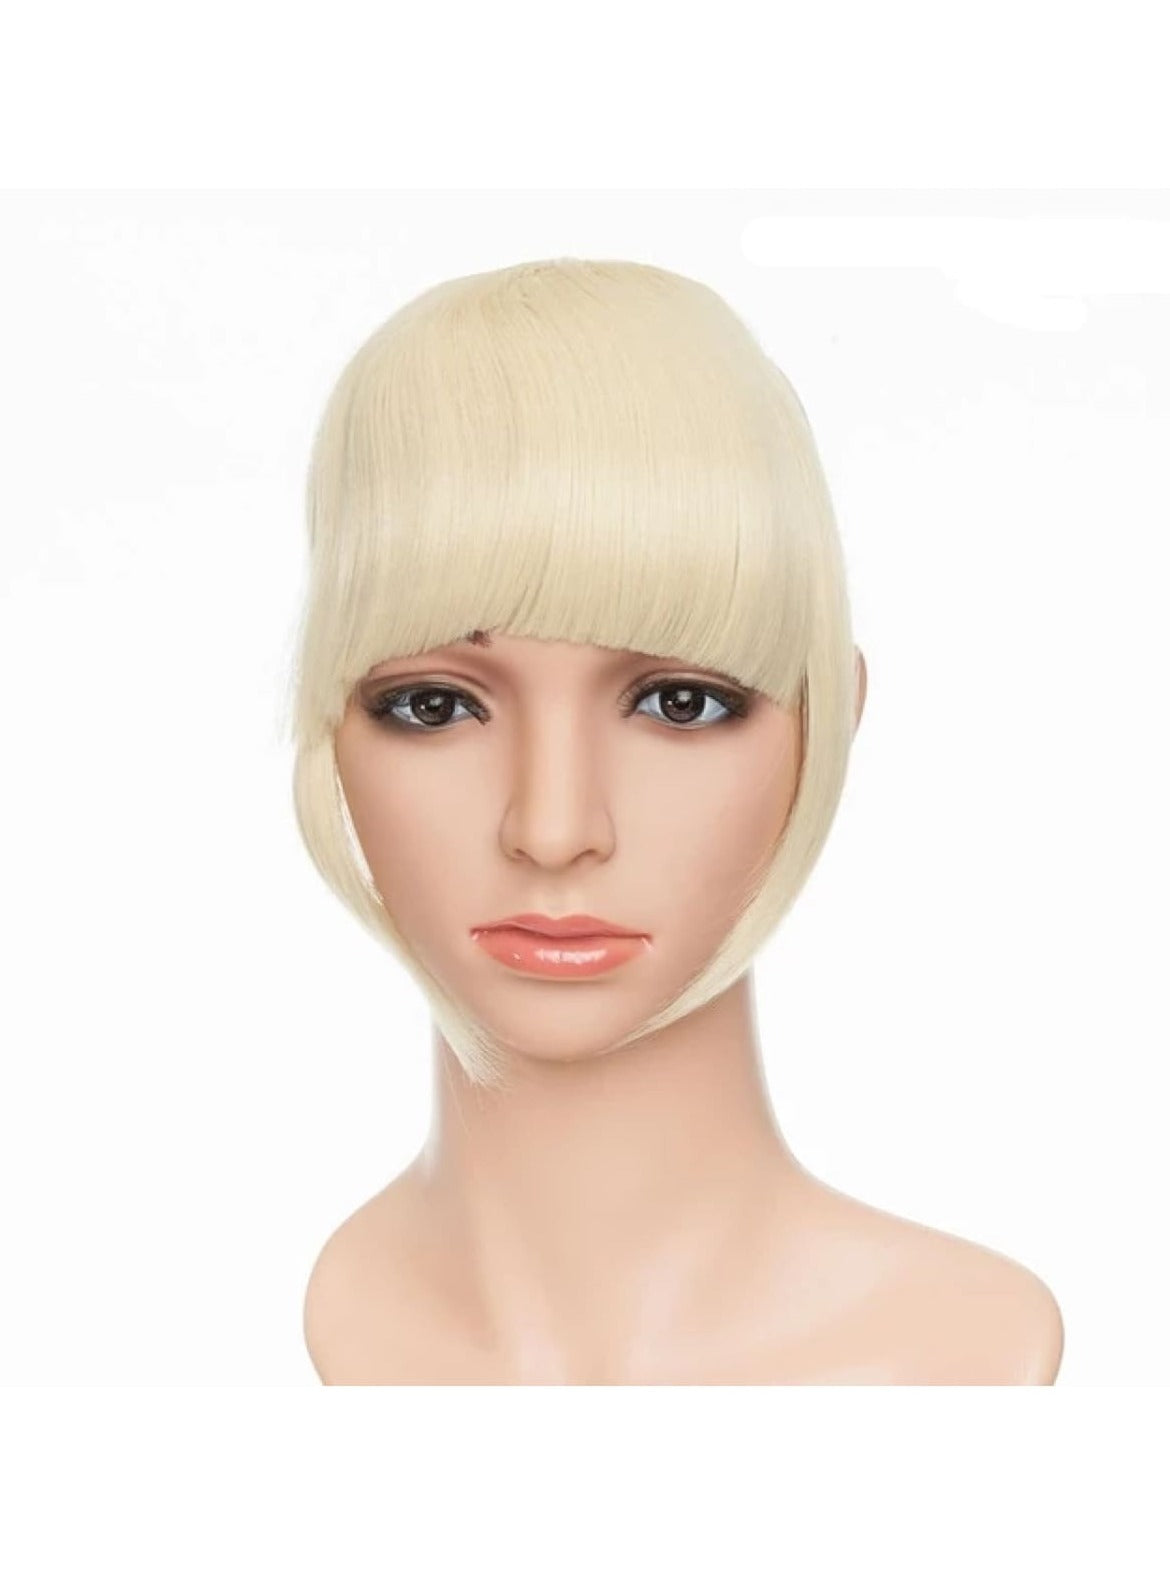 Girls Synthetic Removable Clip-On Bangs - Bleach Blonde / One Size - Girls Halloween Costume